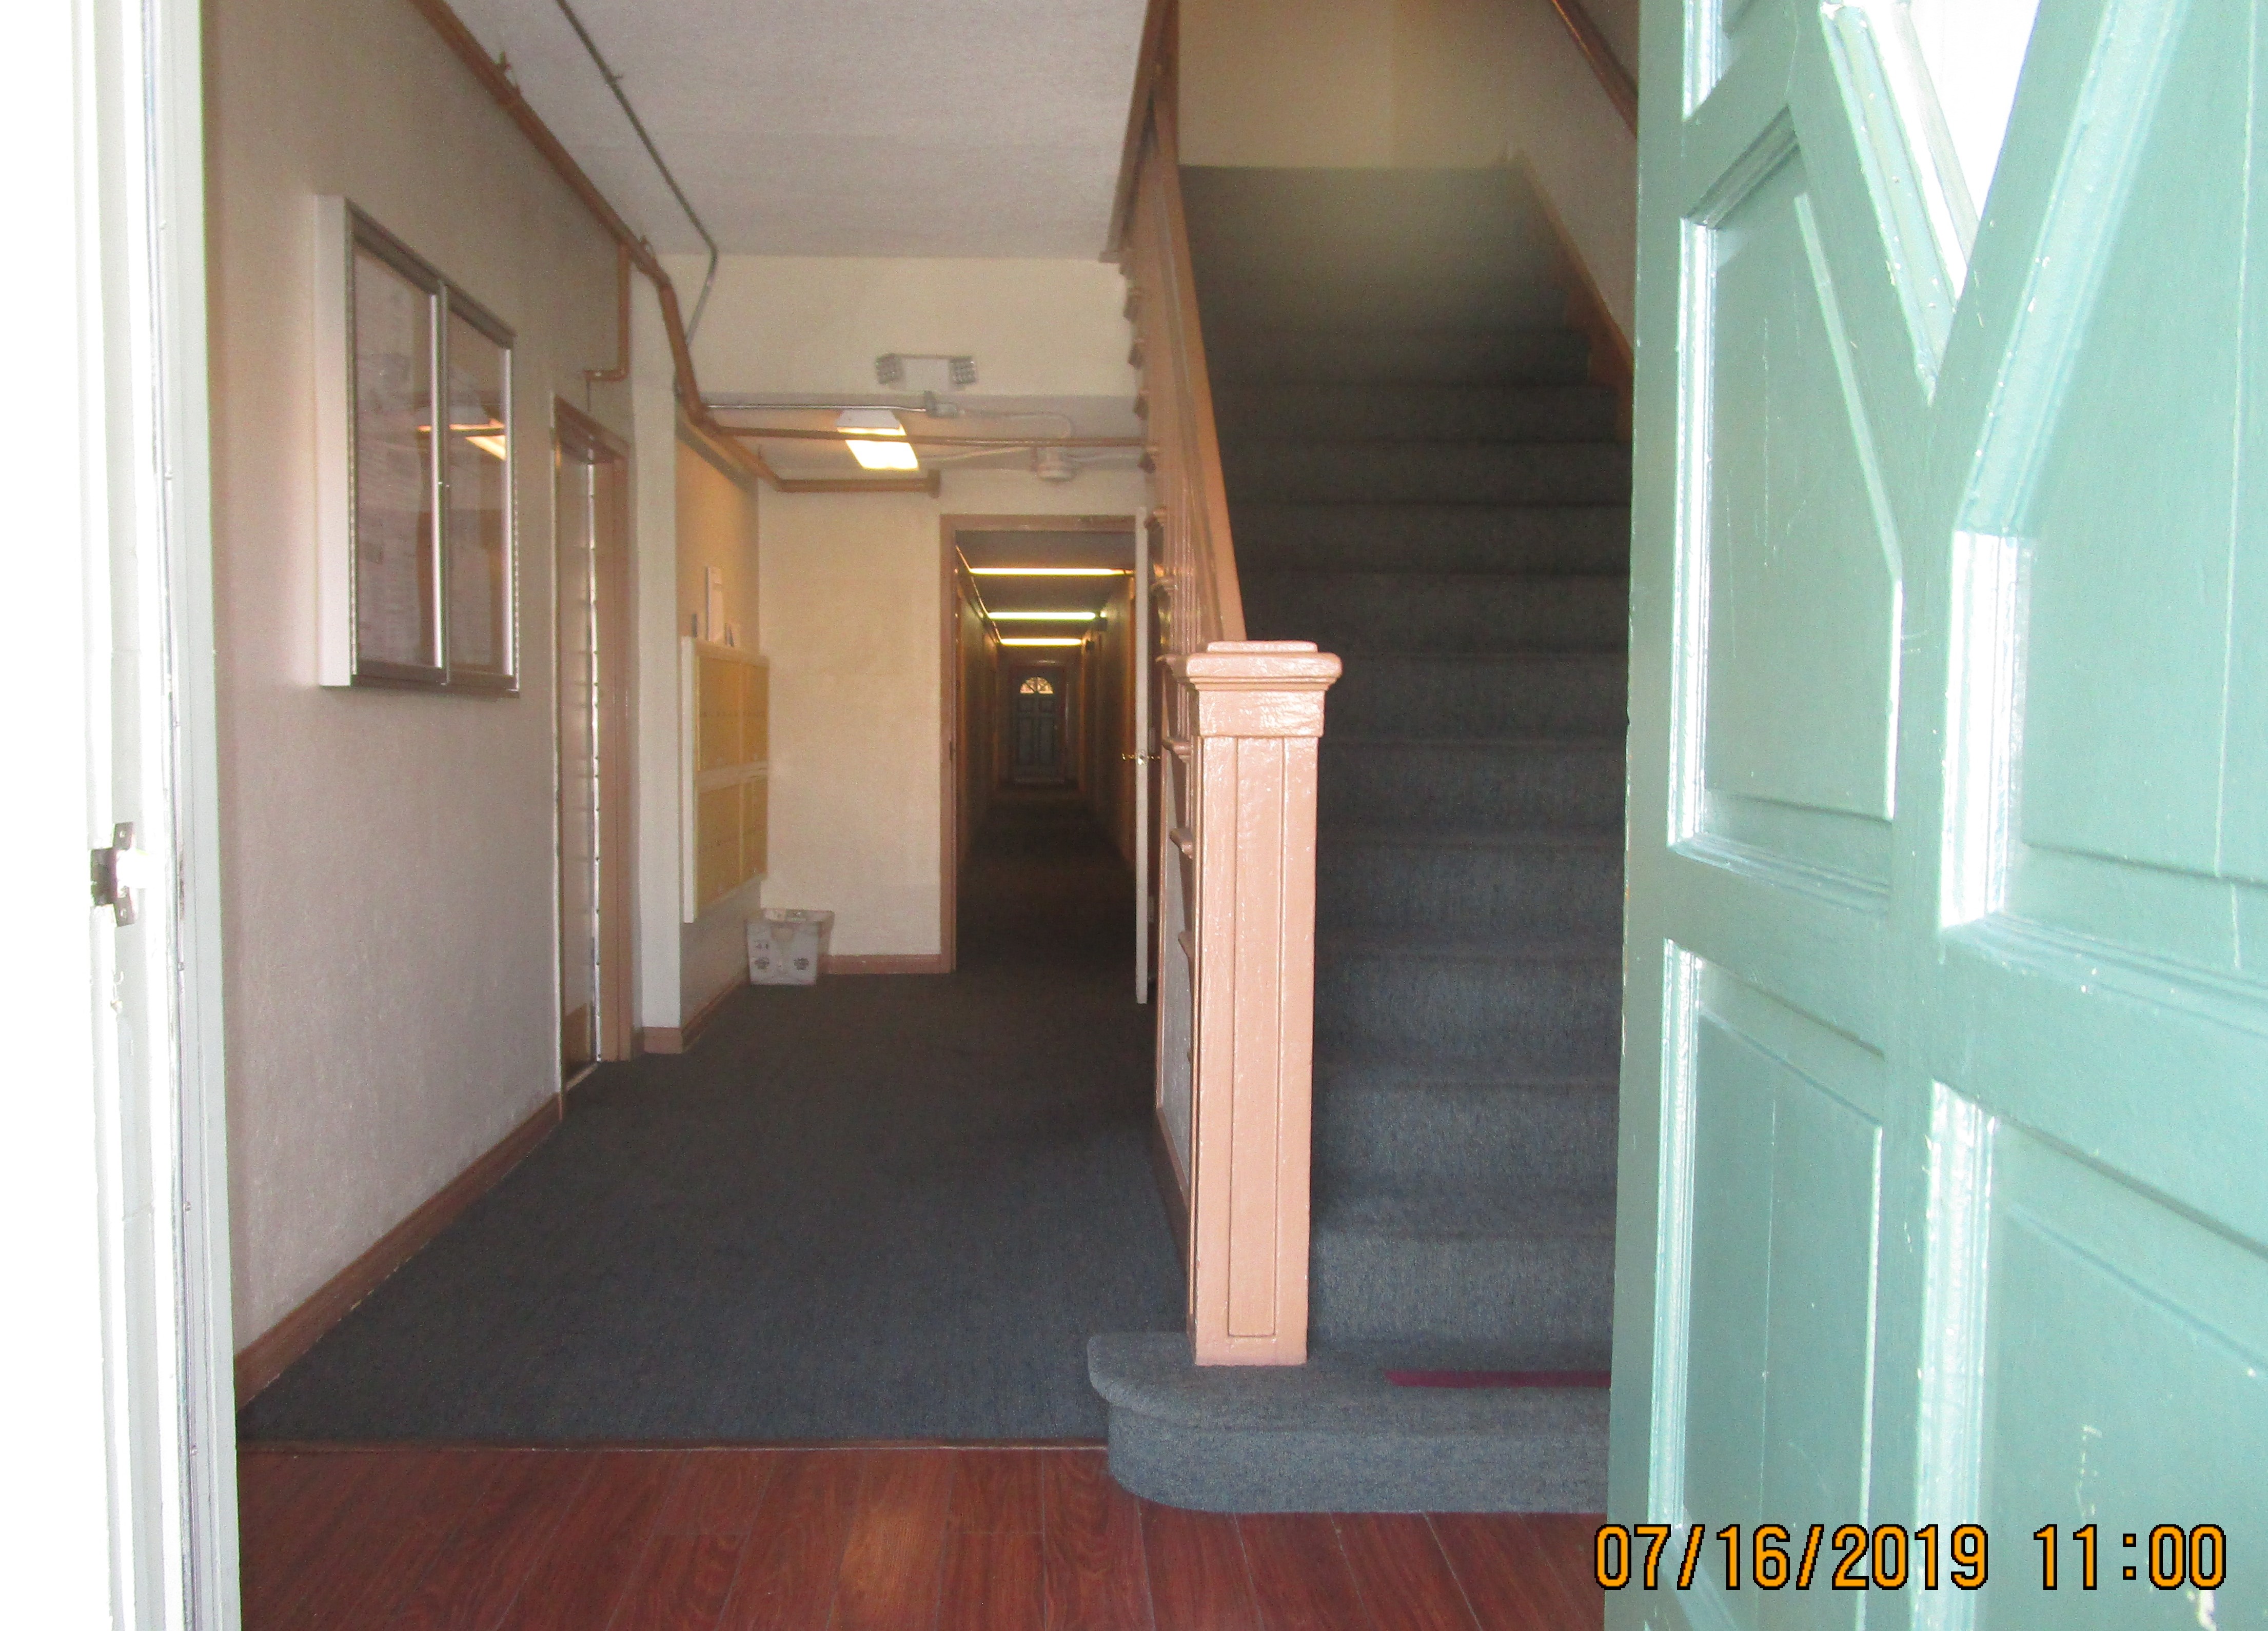 Stairs on right side and a long hallway along the length of the building on the left side. Mailbox area and bulletin board on the left side.